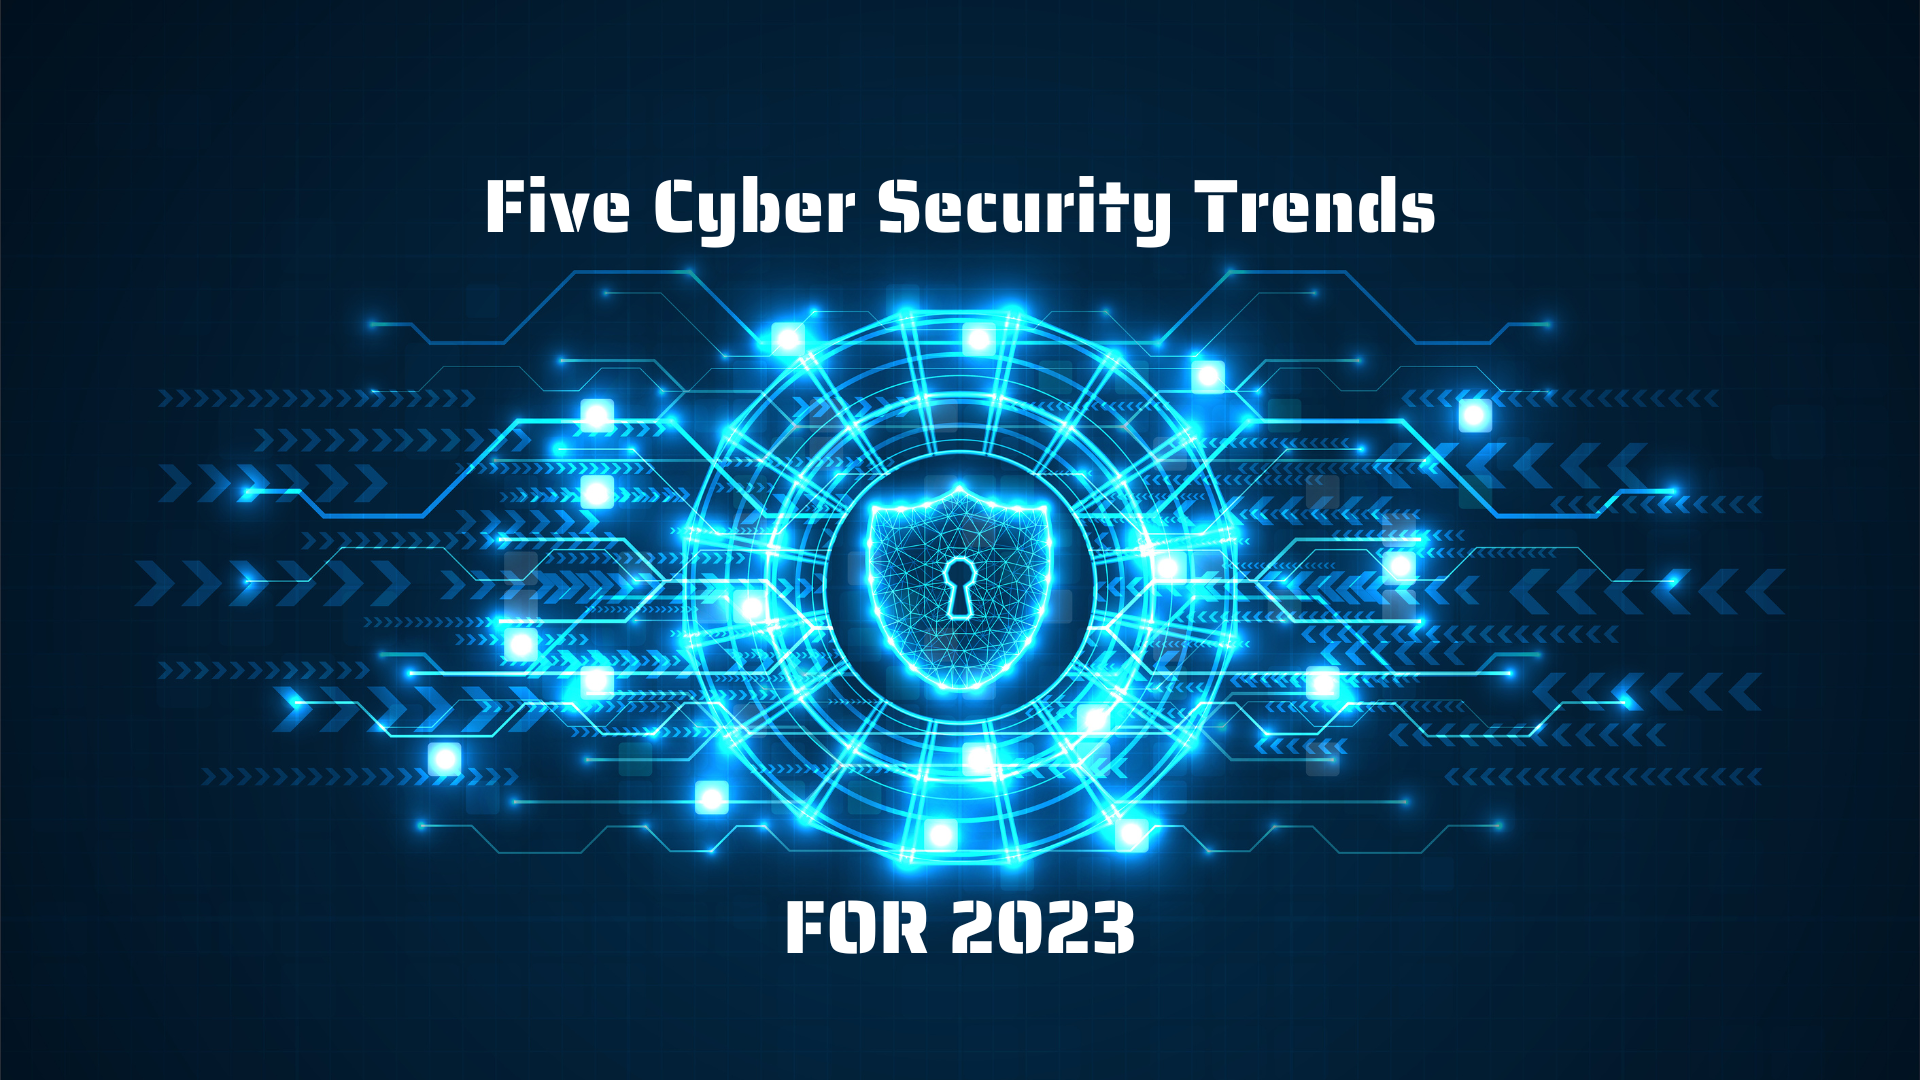 FIVE CYBER SECURITY TRENDS FOR 2023